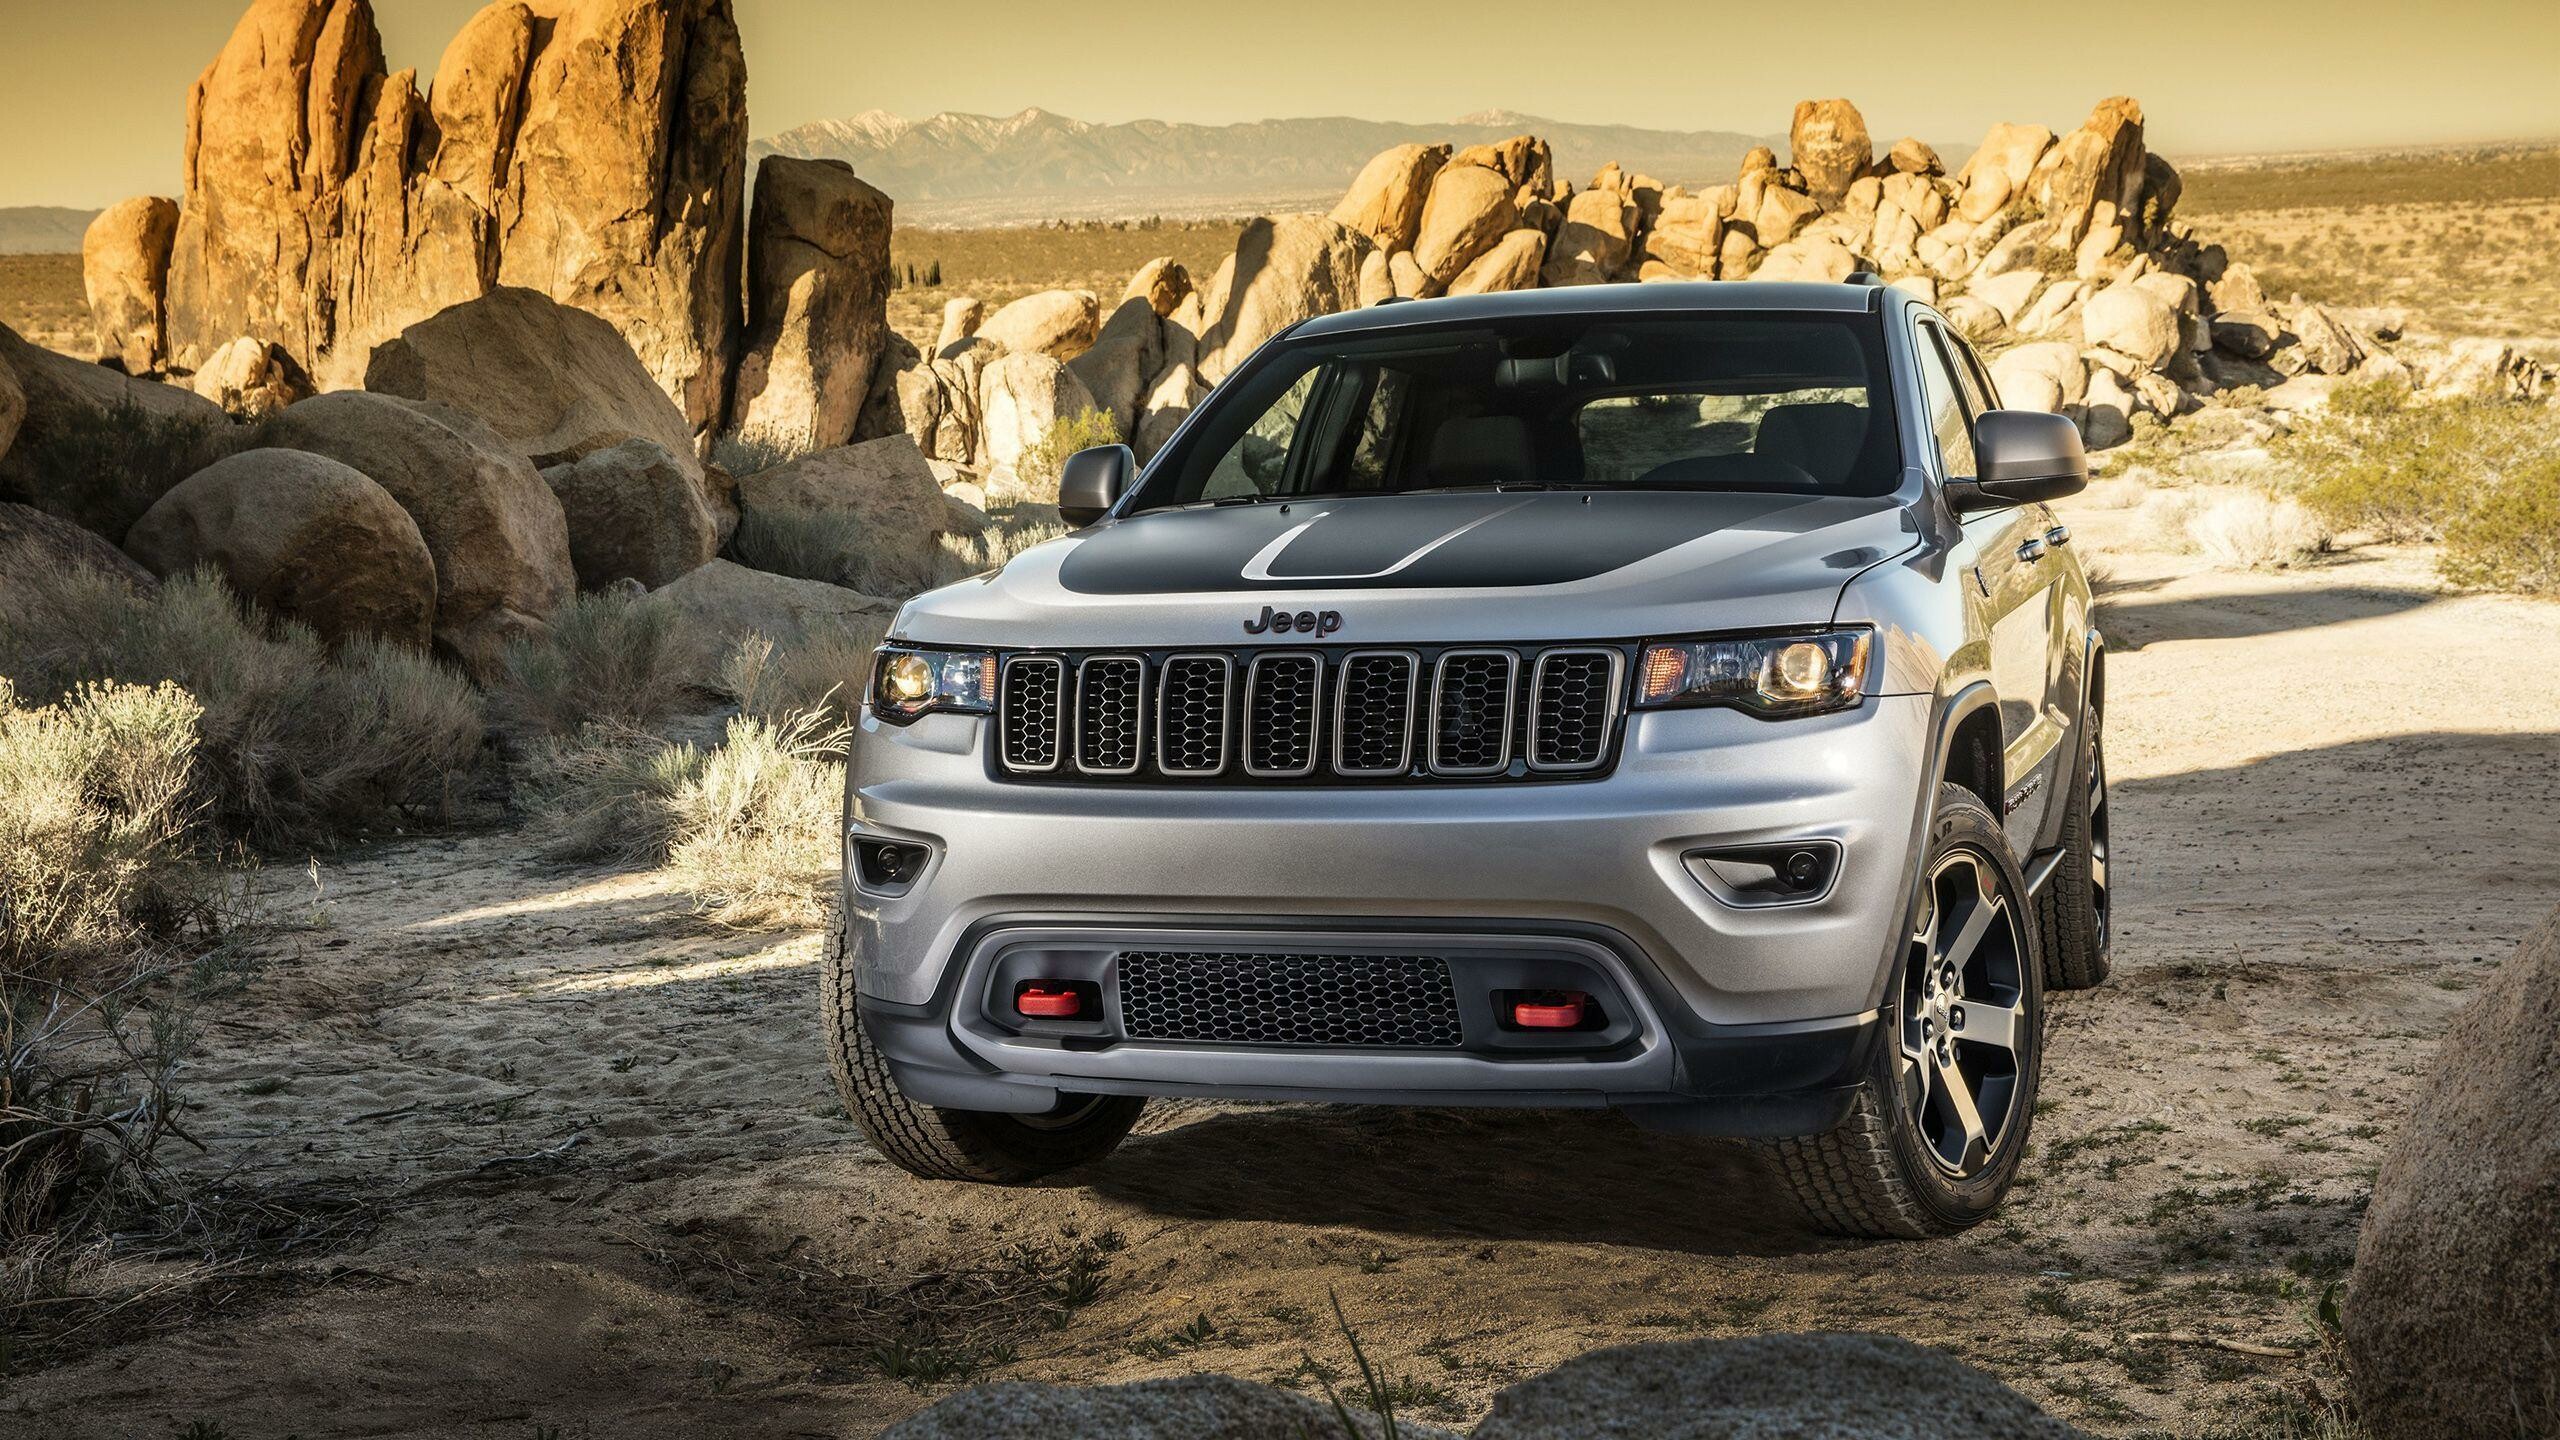 Jeep: Grand Cherokee, A range of mid-size SUVs produced by the American manufacturer. 2560x1440 HD Wallpaper.